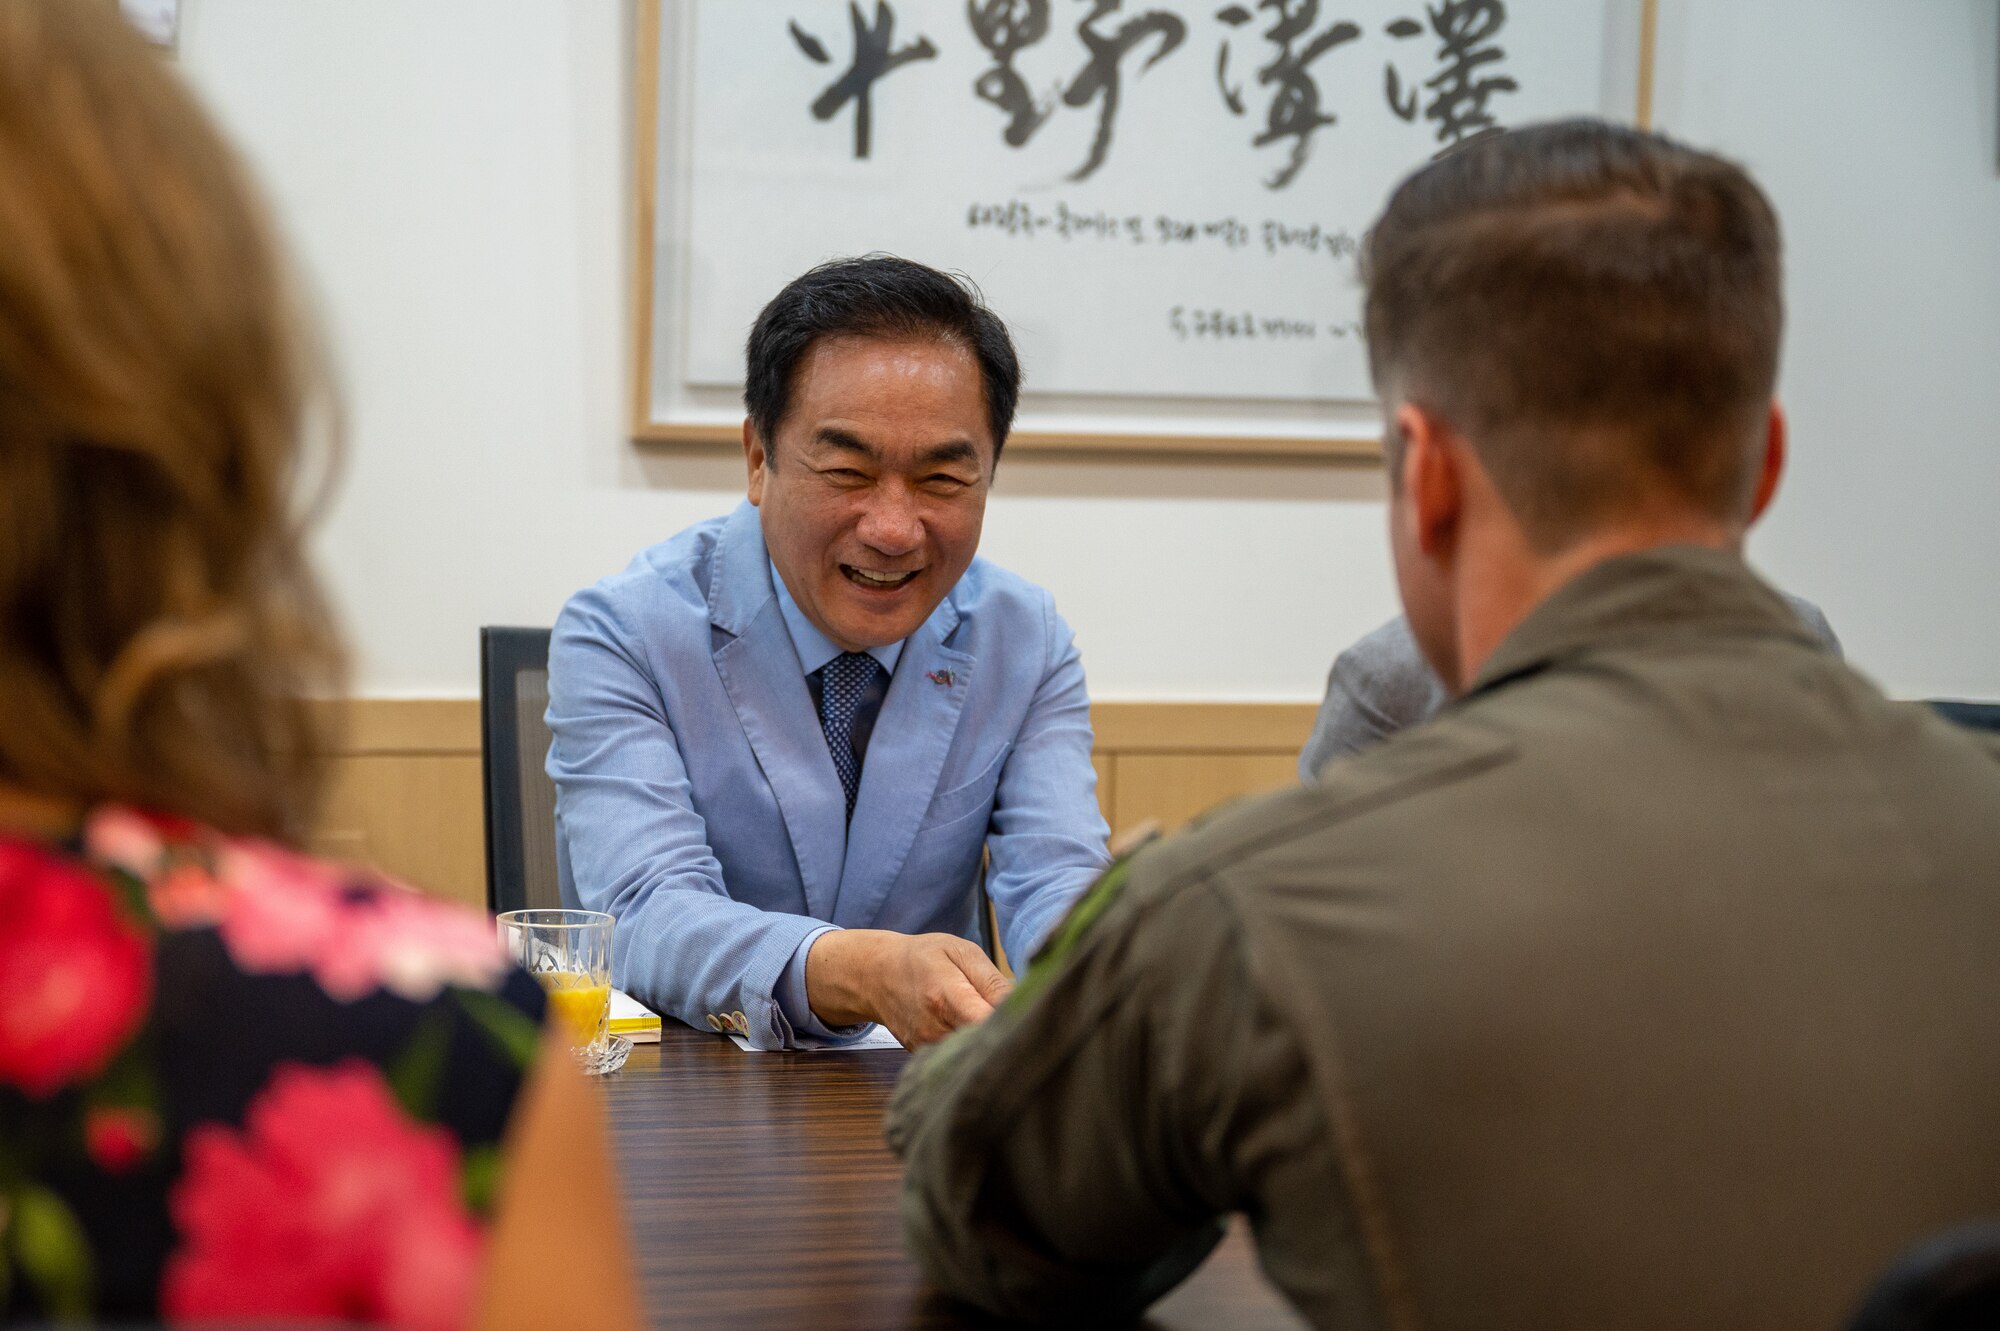 Mr. Jung, Jang Seon, laughs as he speaks with U.S. Air Force Col. Joshua Wood, 51st Fighter Wing Commander, at Pyeongtaek City Hall, Republic of Korea, June 1, 2023. Mr. Jung, Jang Seon presented Wood with a plaque of honorary citizenship. (U.S. Air Force photo by Senior Airman Thomas Sjoberg)